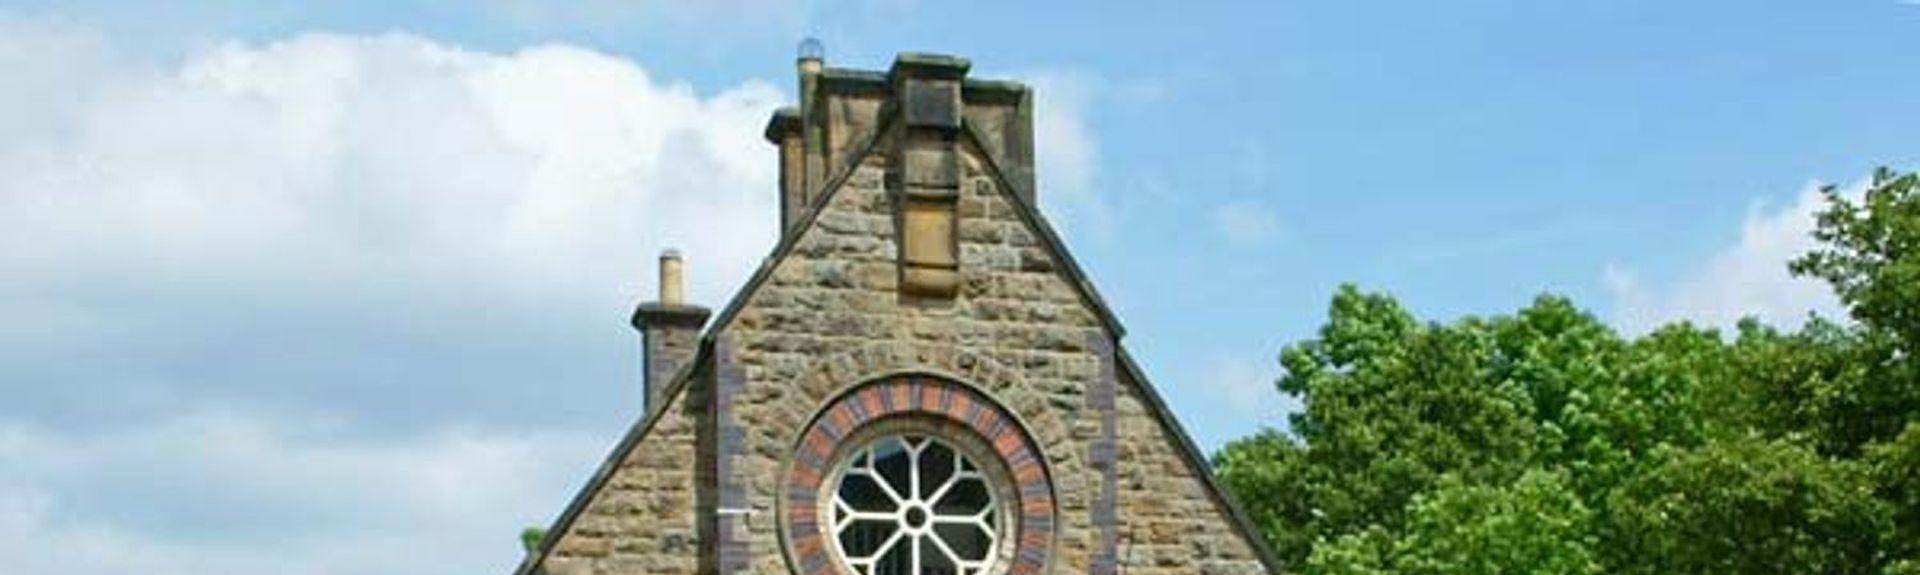 A chapel conversion with a large rose window sits behind a low stone wall.